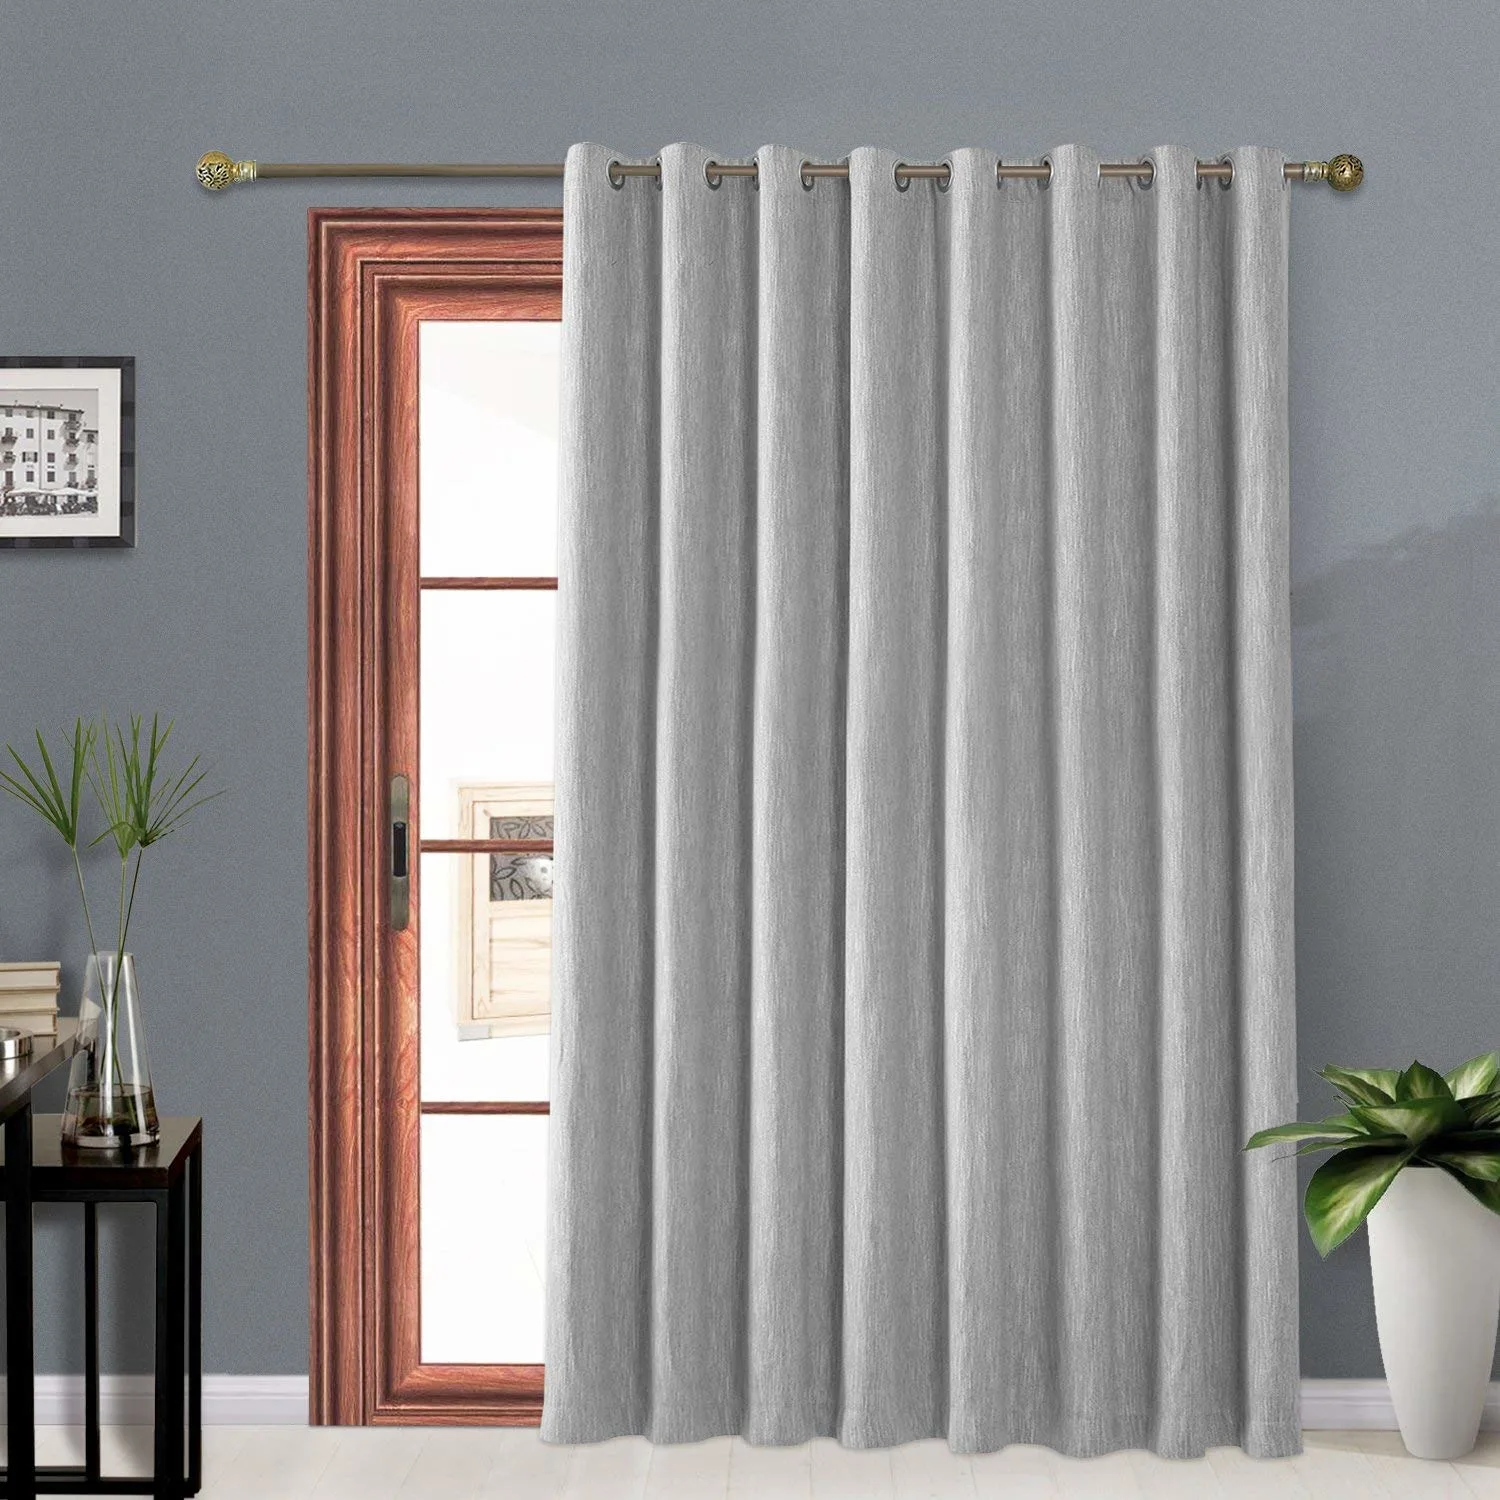 Curtains that keep the cold out Melodieux Elegant Curtains grey polyester cotton blend